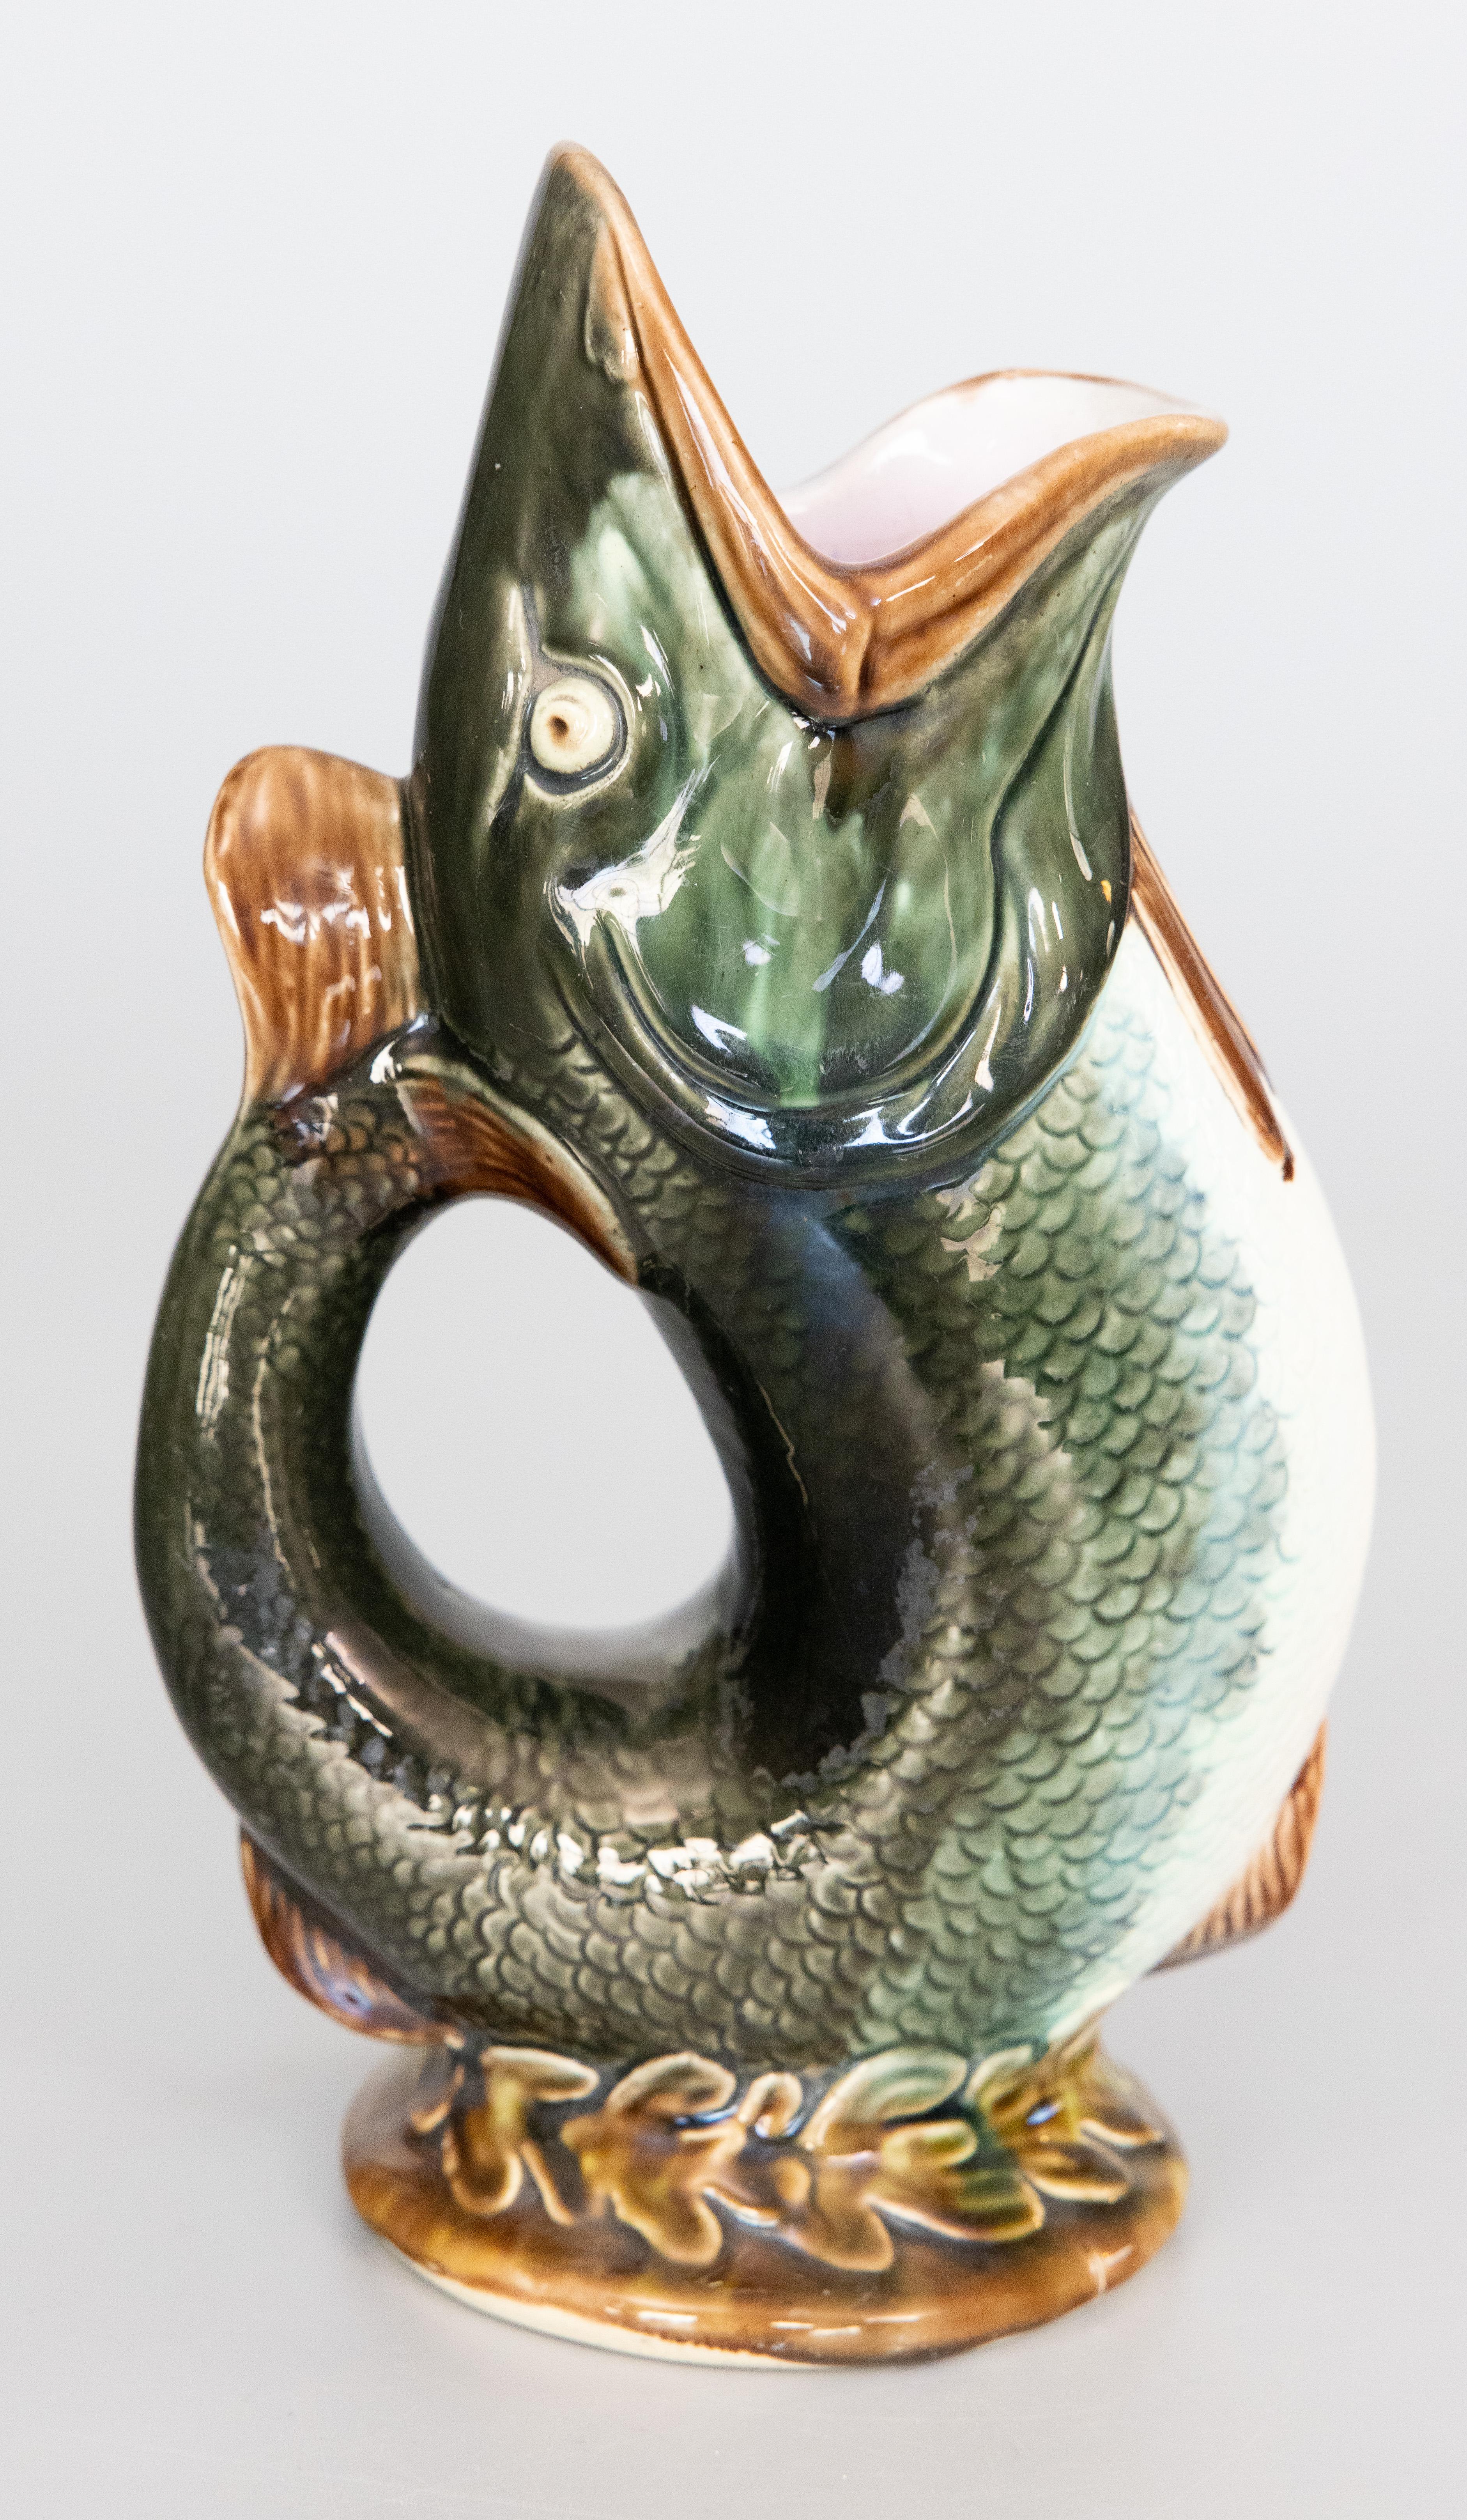 A superb antique English majolica glazed ceramic gurgling fish pitcher or glug jug, circa 1880. Maker's mark on reverse. This whimsical fish pitcher has a stylish design in a lovely glazed dark green color with a decorative seaweed base, perfect for